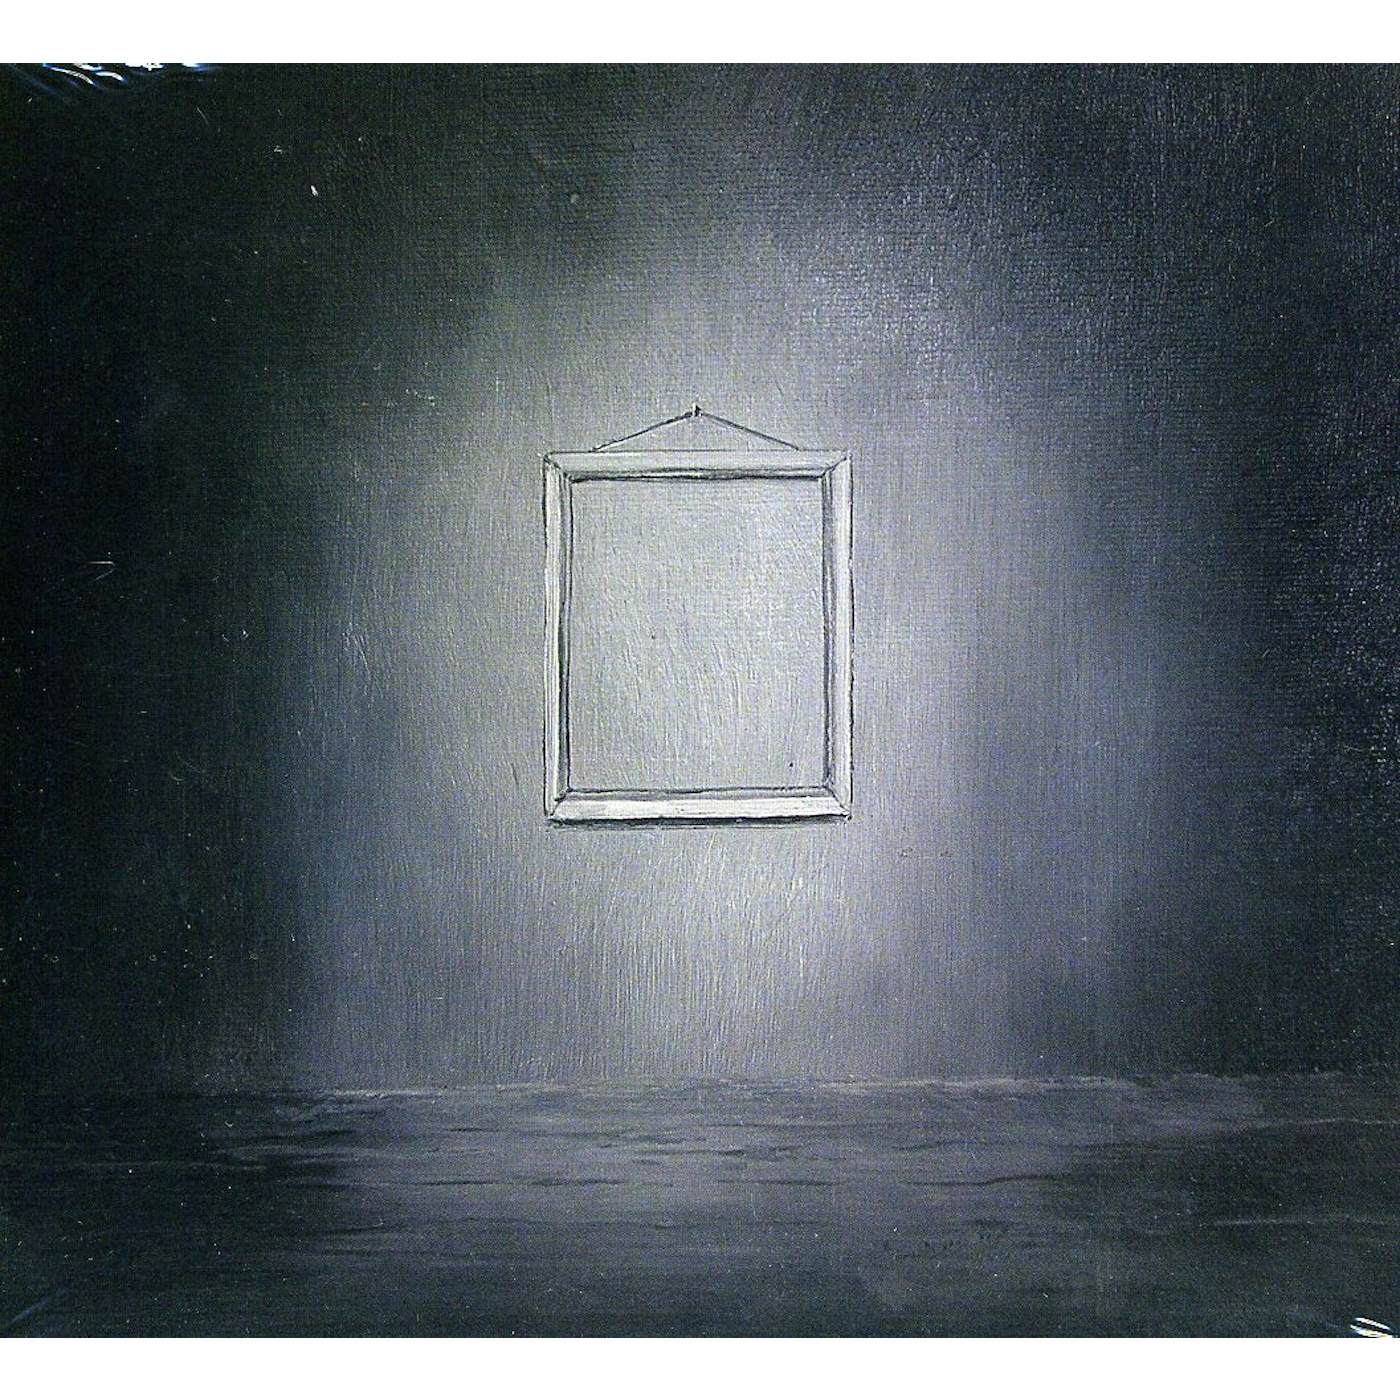 Everywhere At The End Of Time - the Caretaker - playlist by Alejandro_cg